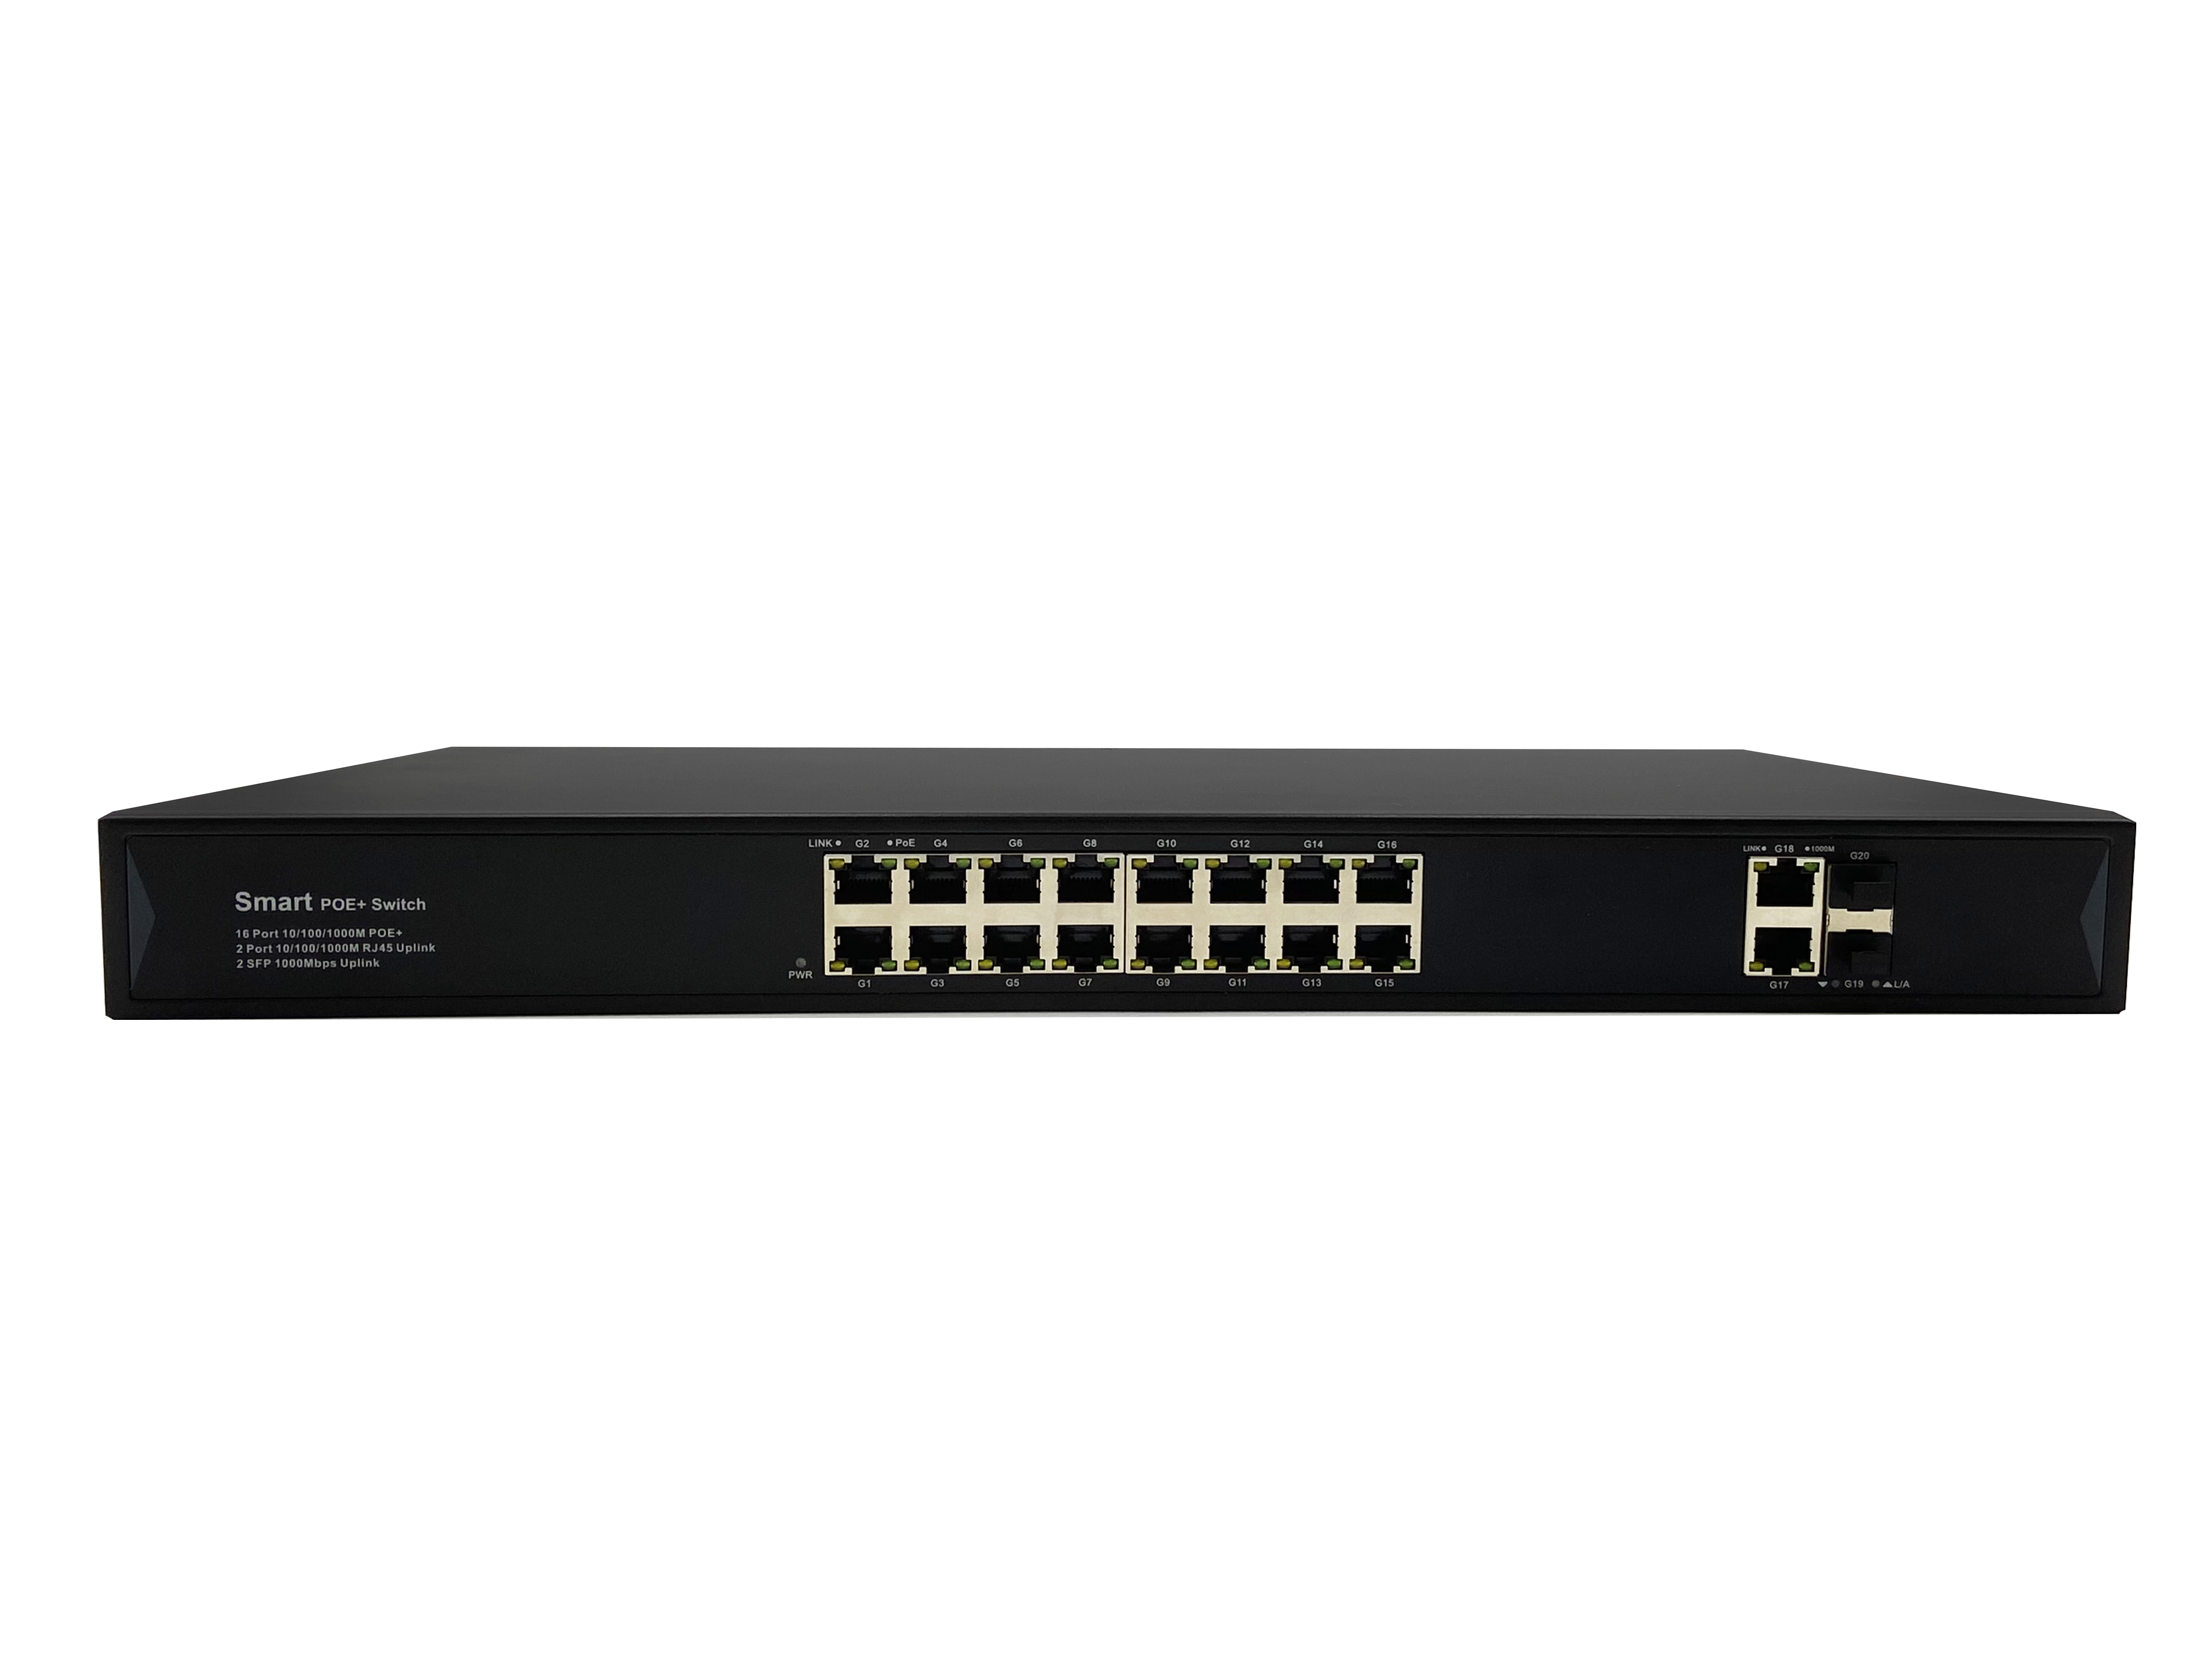 16 10/100/1000Base-T(X) PoE Port and 2 10/100/1000Base-T(X) Uplink Port and 2 10/100/1000Base-X unmanaged PoE Ethernet Switch JHA-P422016BHGW